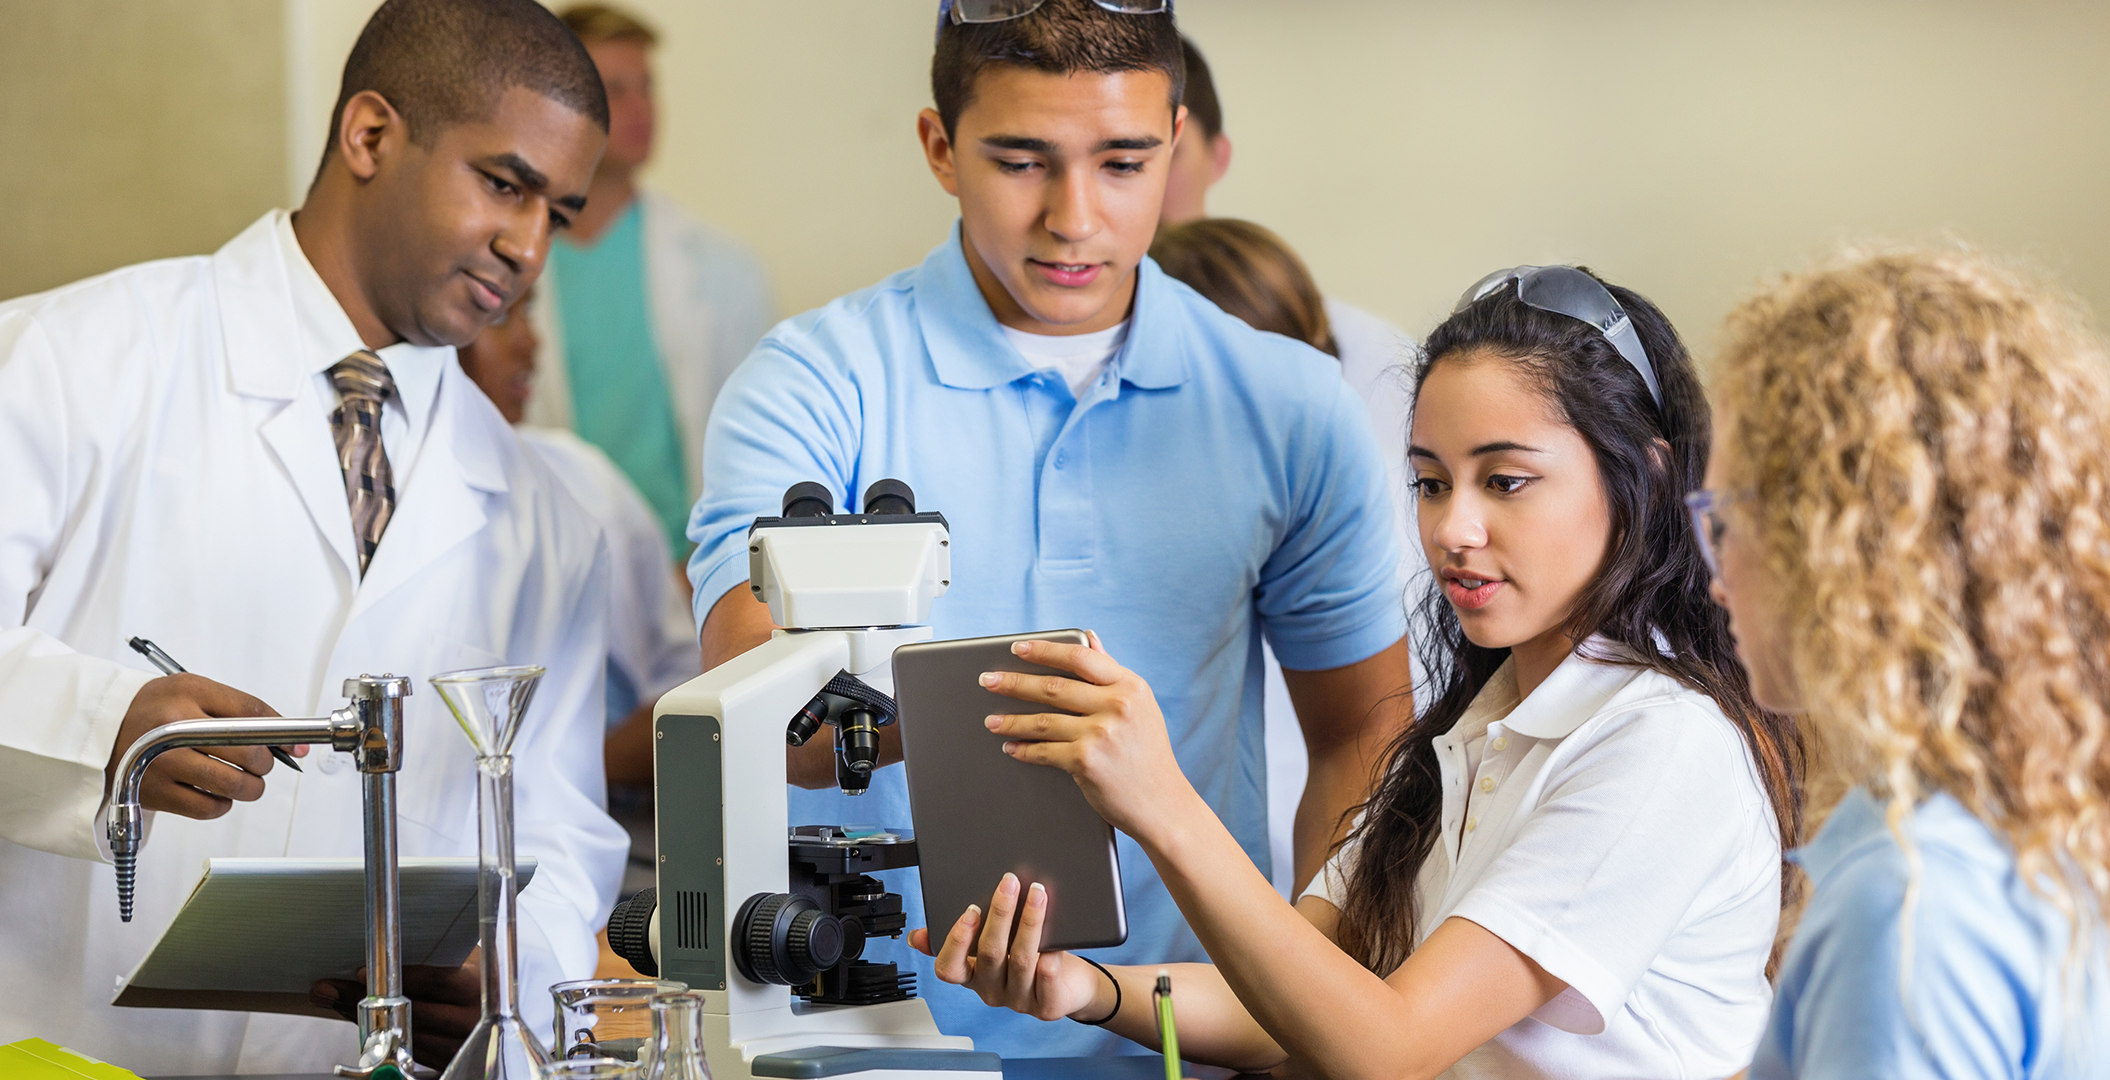 A group of students gather around a microscope.